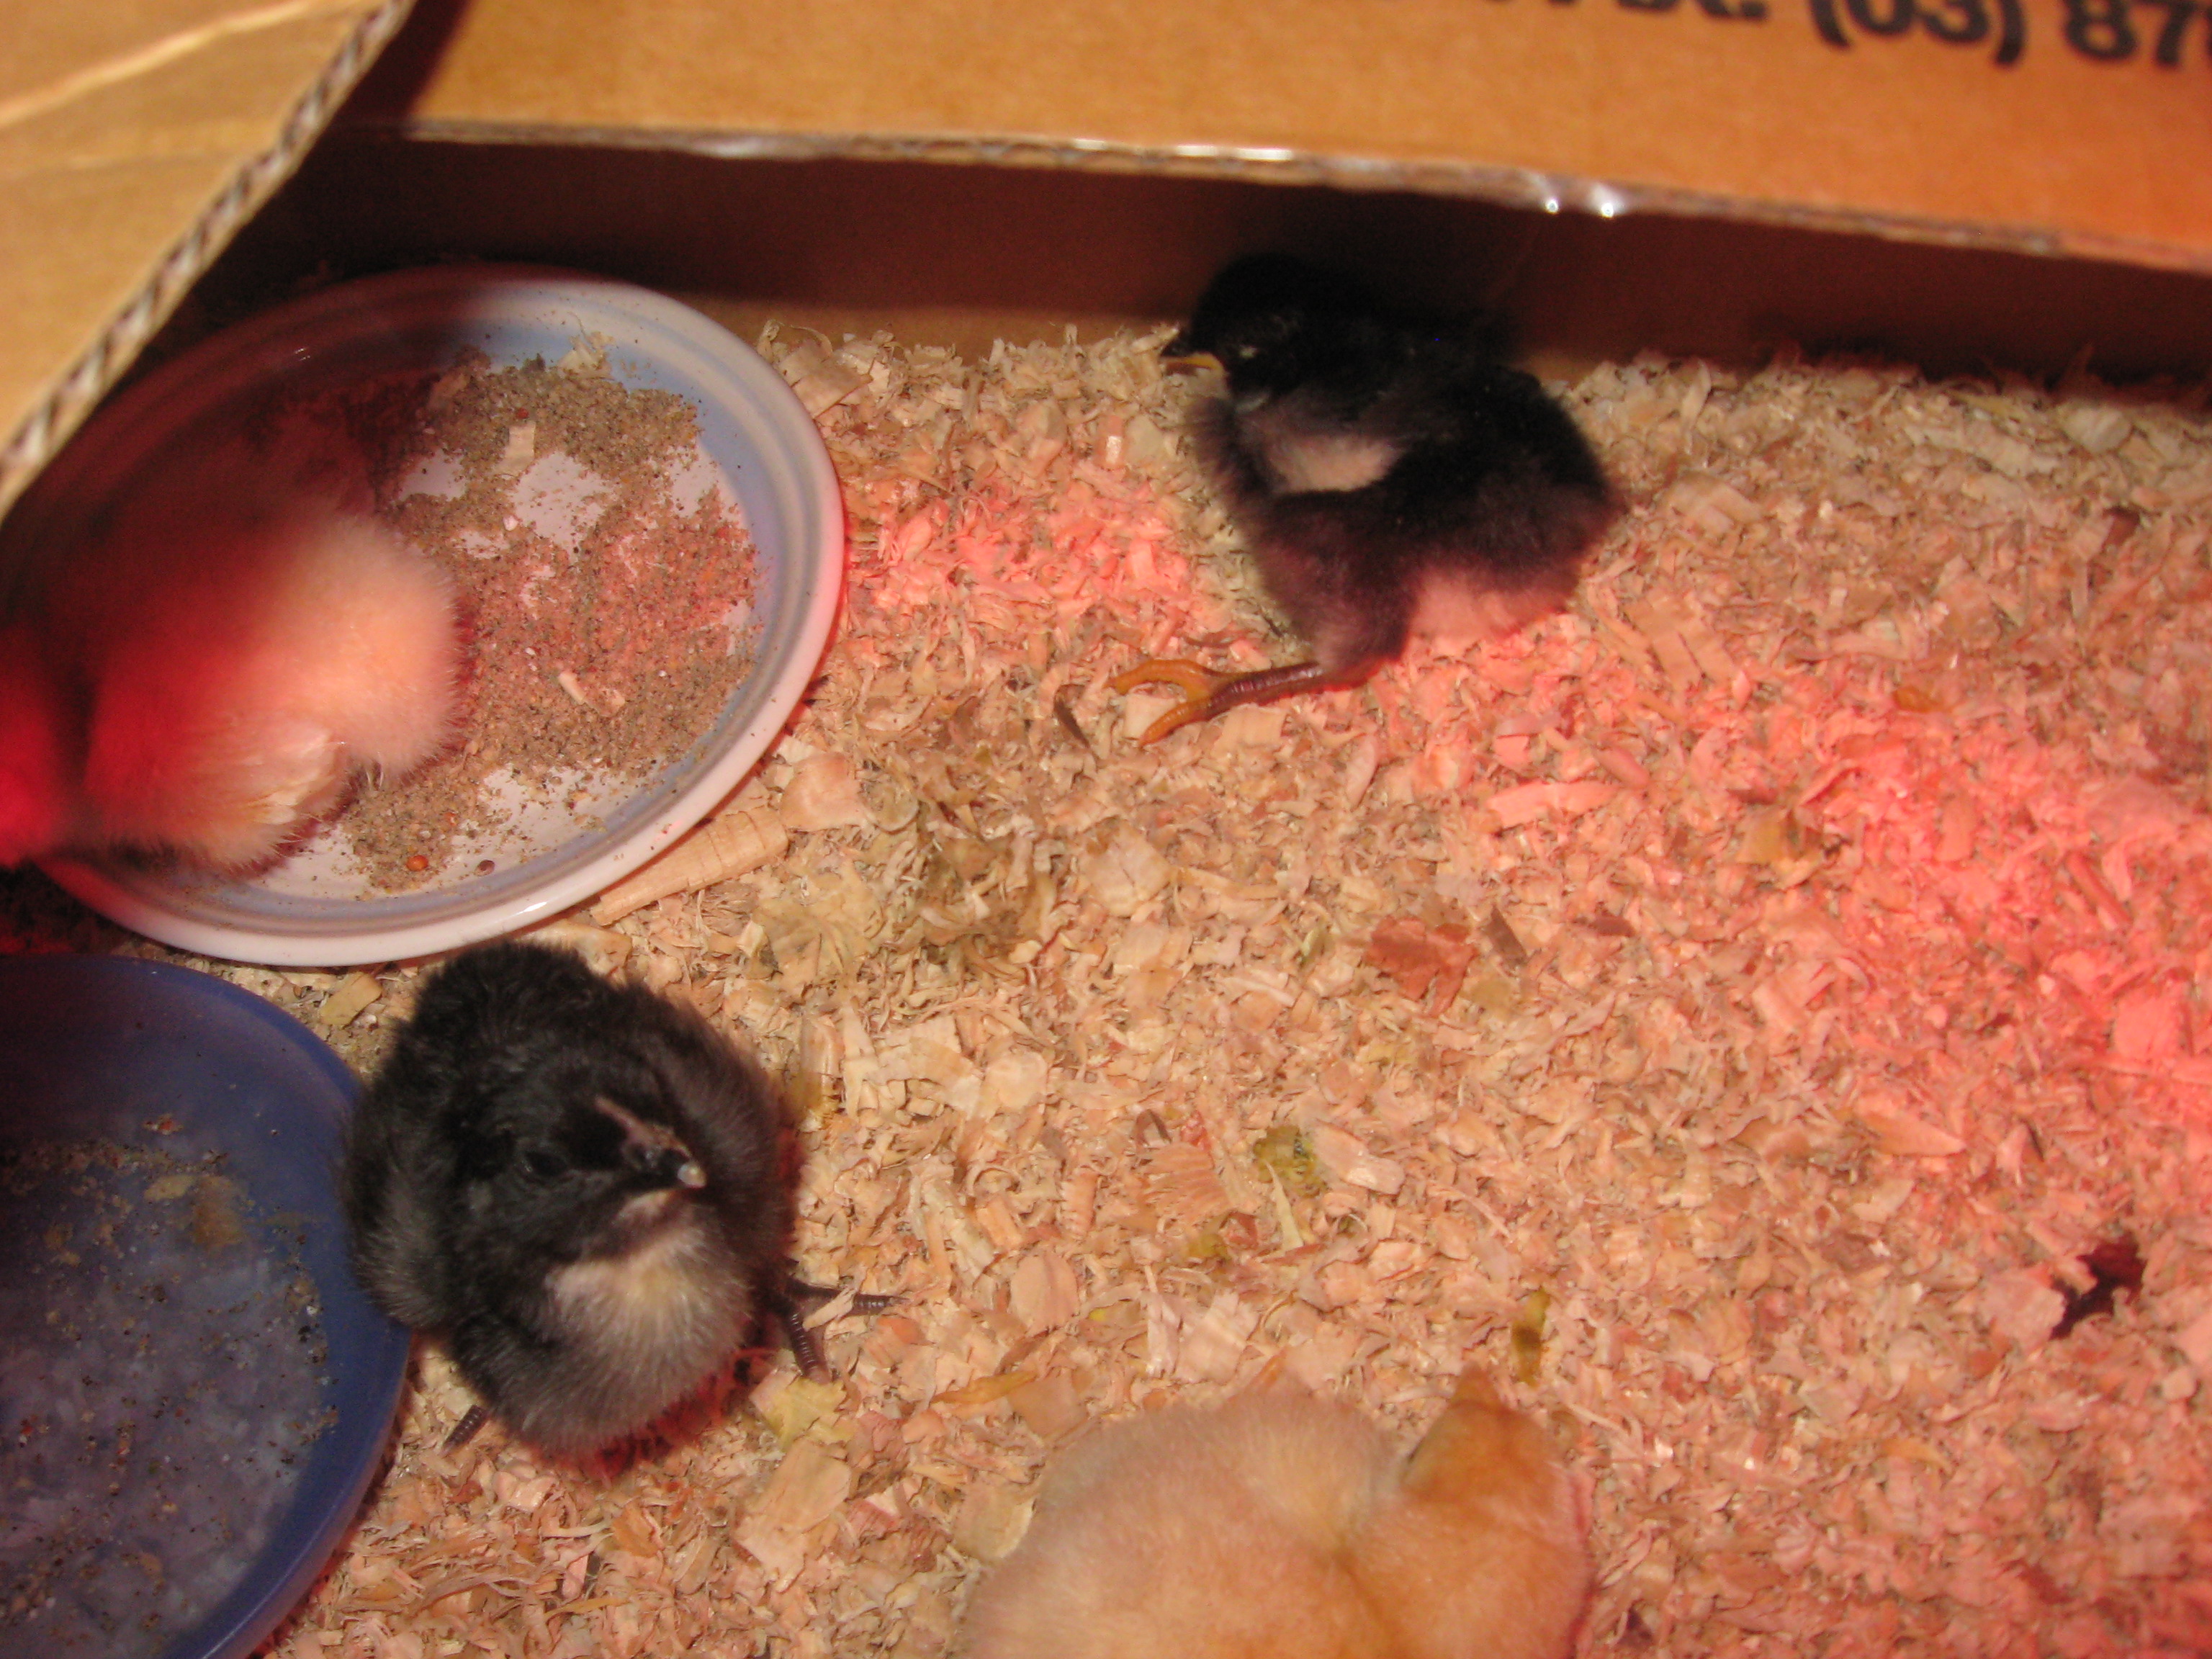 Our new babies born around Mid June. First ones to hatch on 16/5/12 but, since they weren't with me I don't know who came first